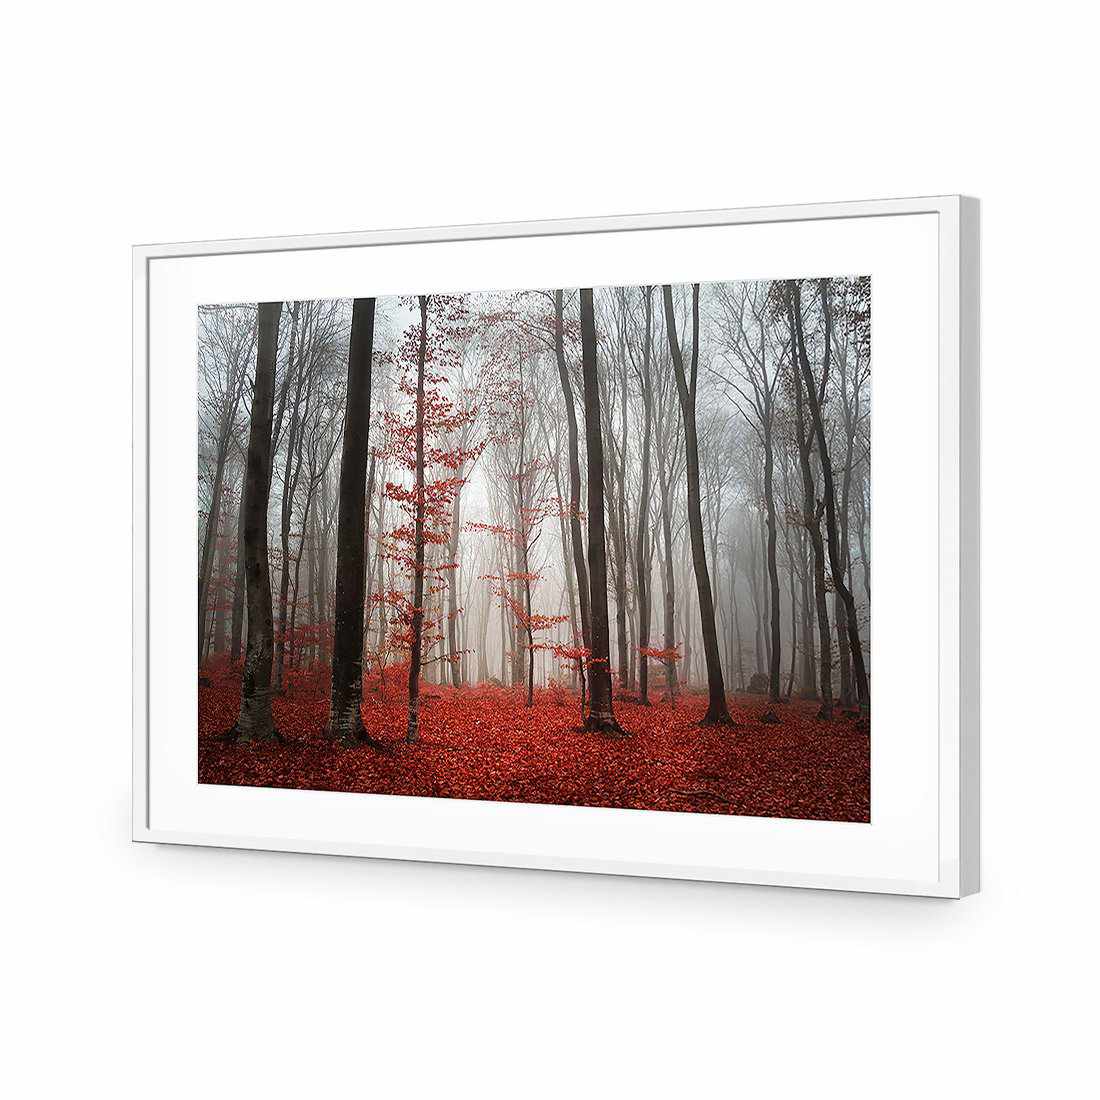 Scarlet Forest-Acrylic-Wall Art Design-With Border-Acrylic - White Frame-45x30cm-Wall Art Designs